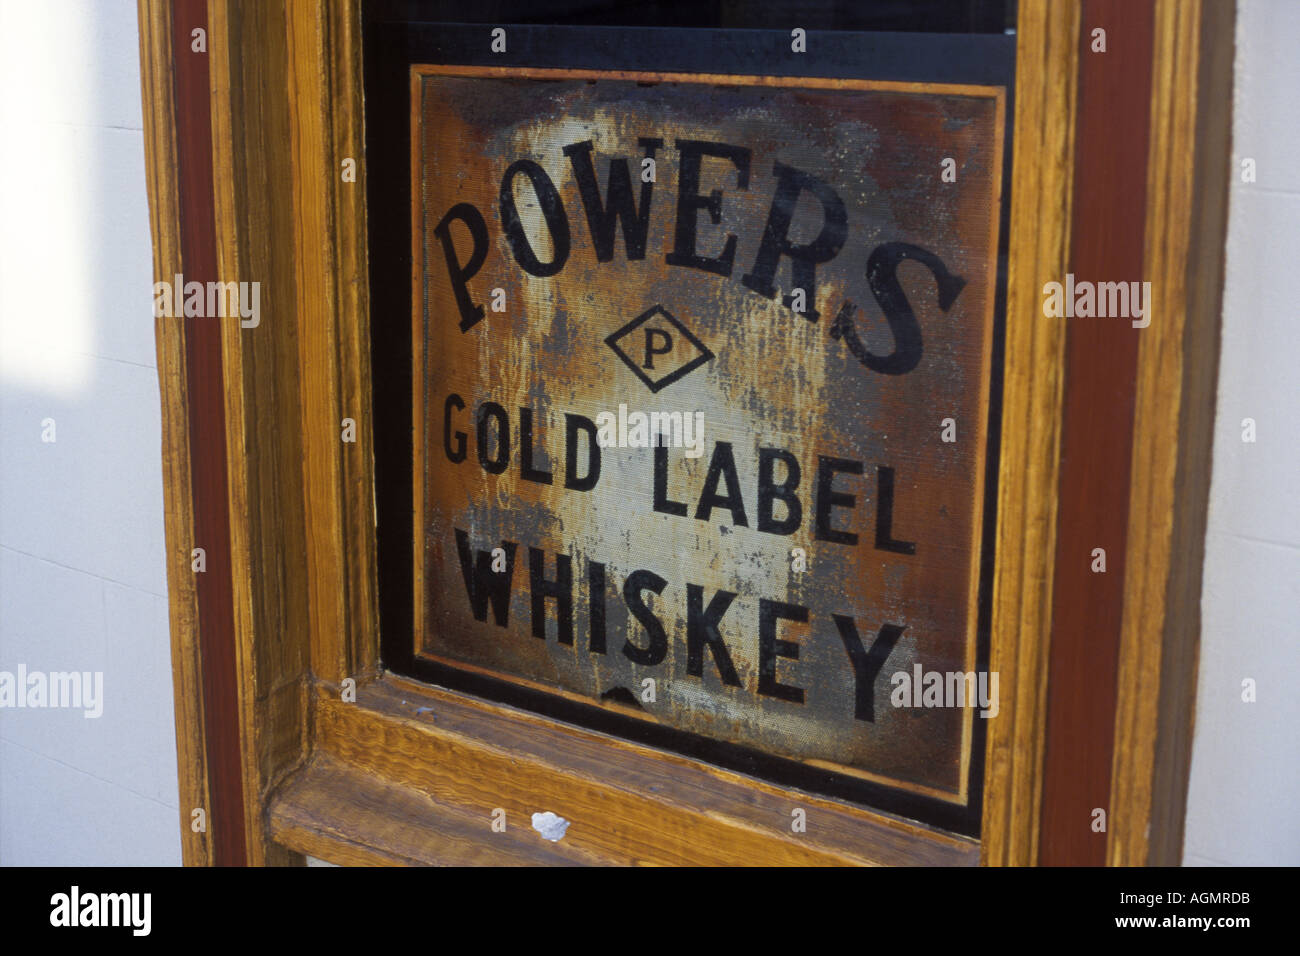 Powers Gold Label Whiskey sign in the window of a pub in Drogheda Ireland Stock Photo